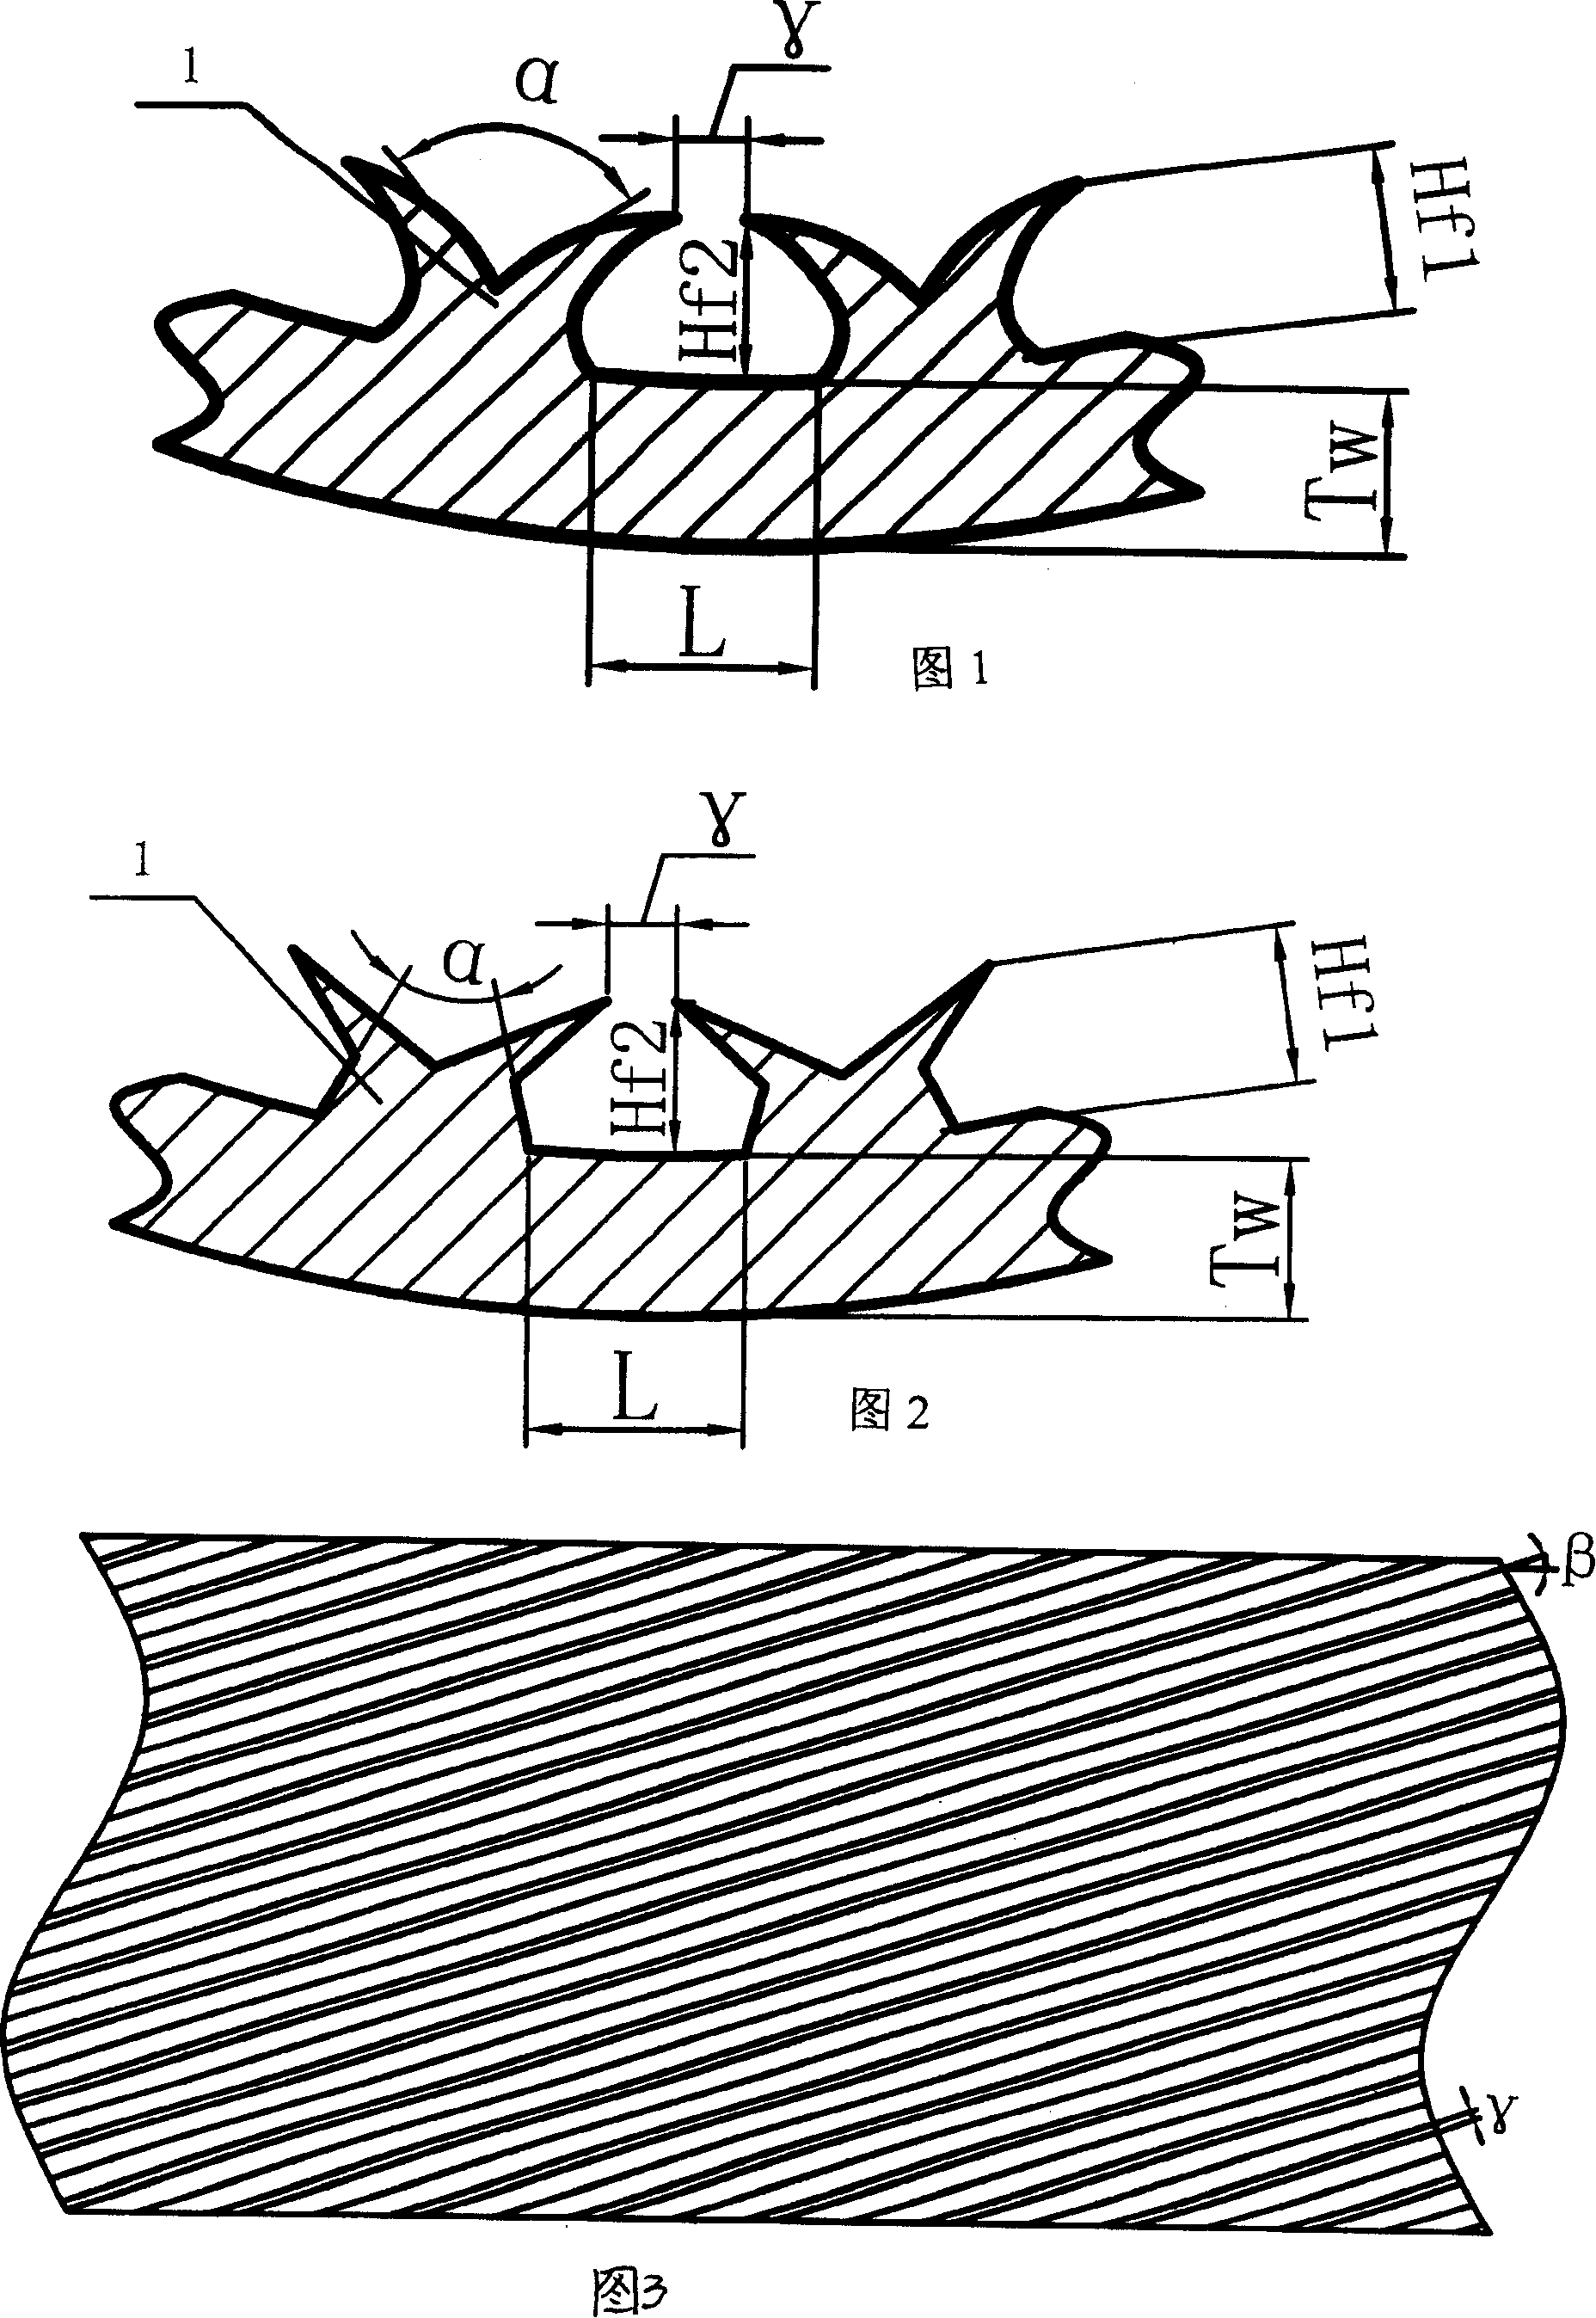 Heat transfer pipe with internal threads